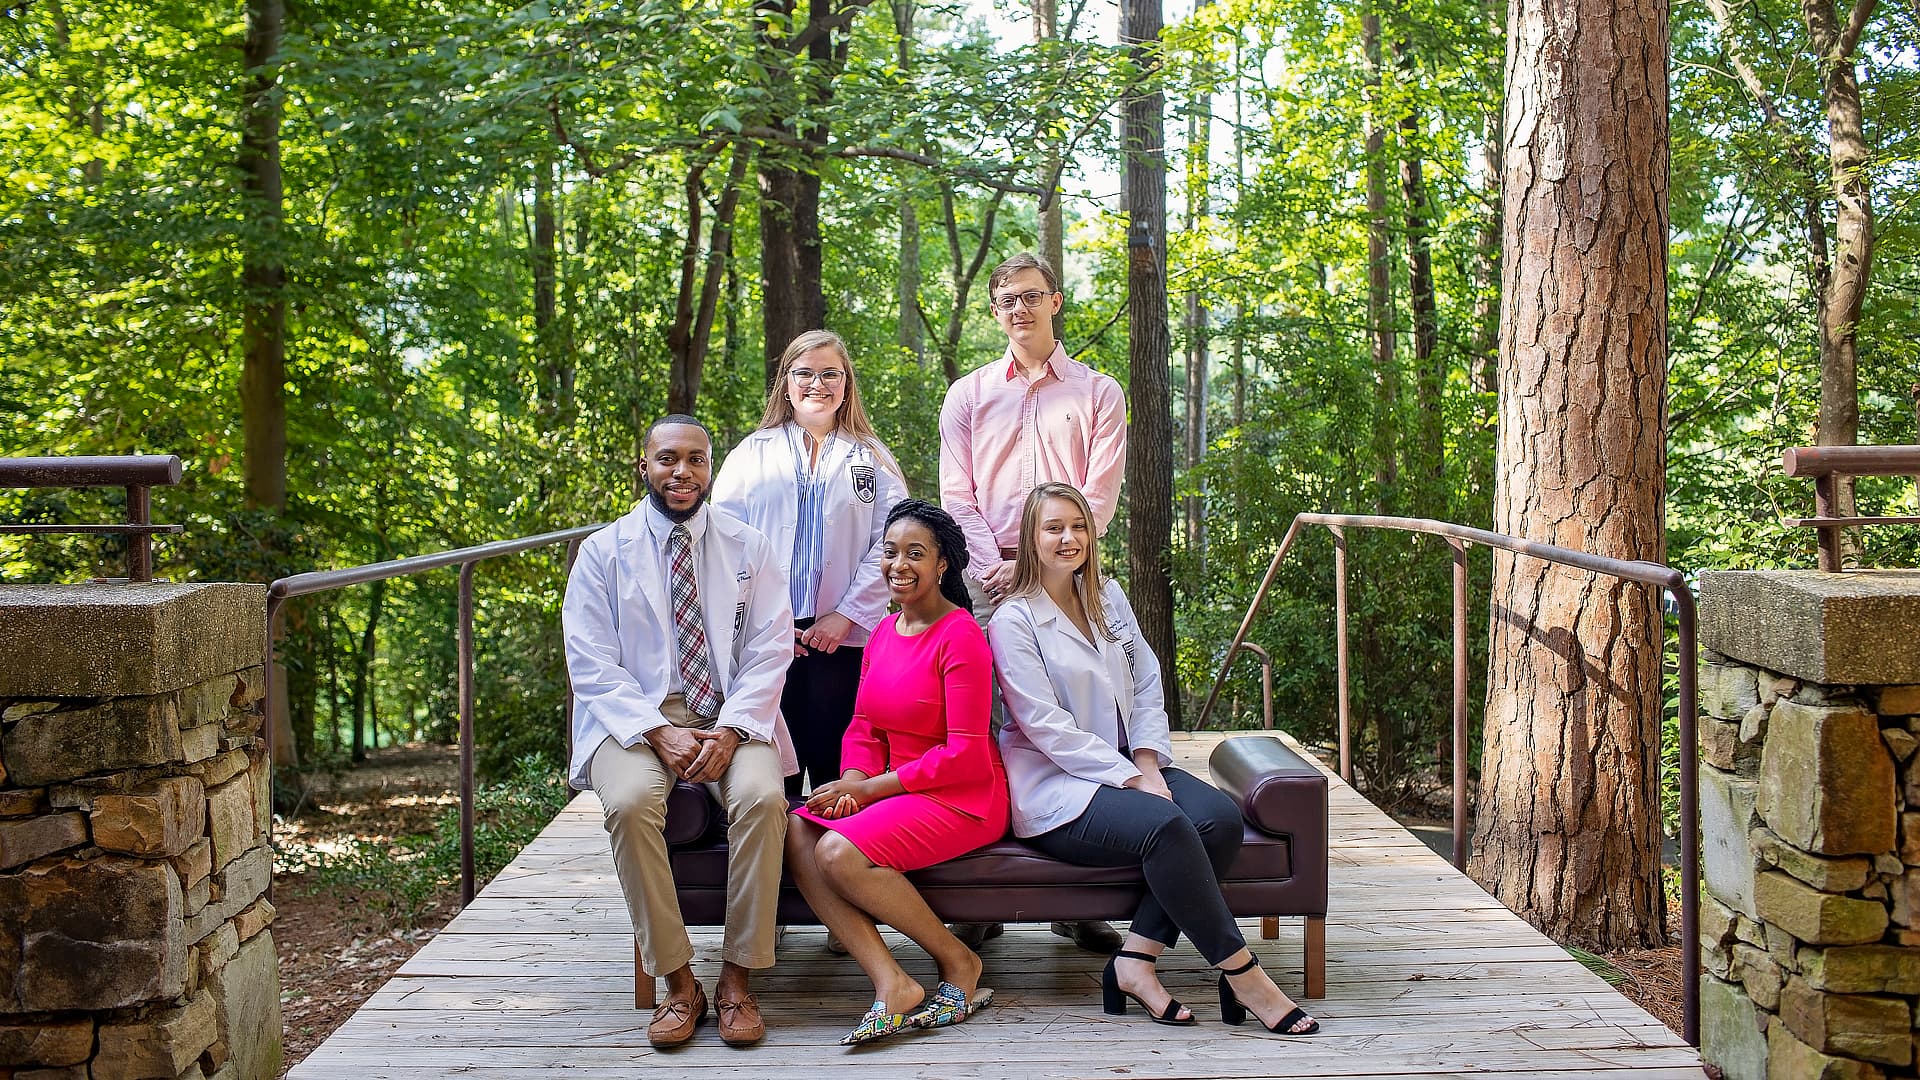 five pharmacy students among the trees